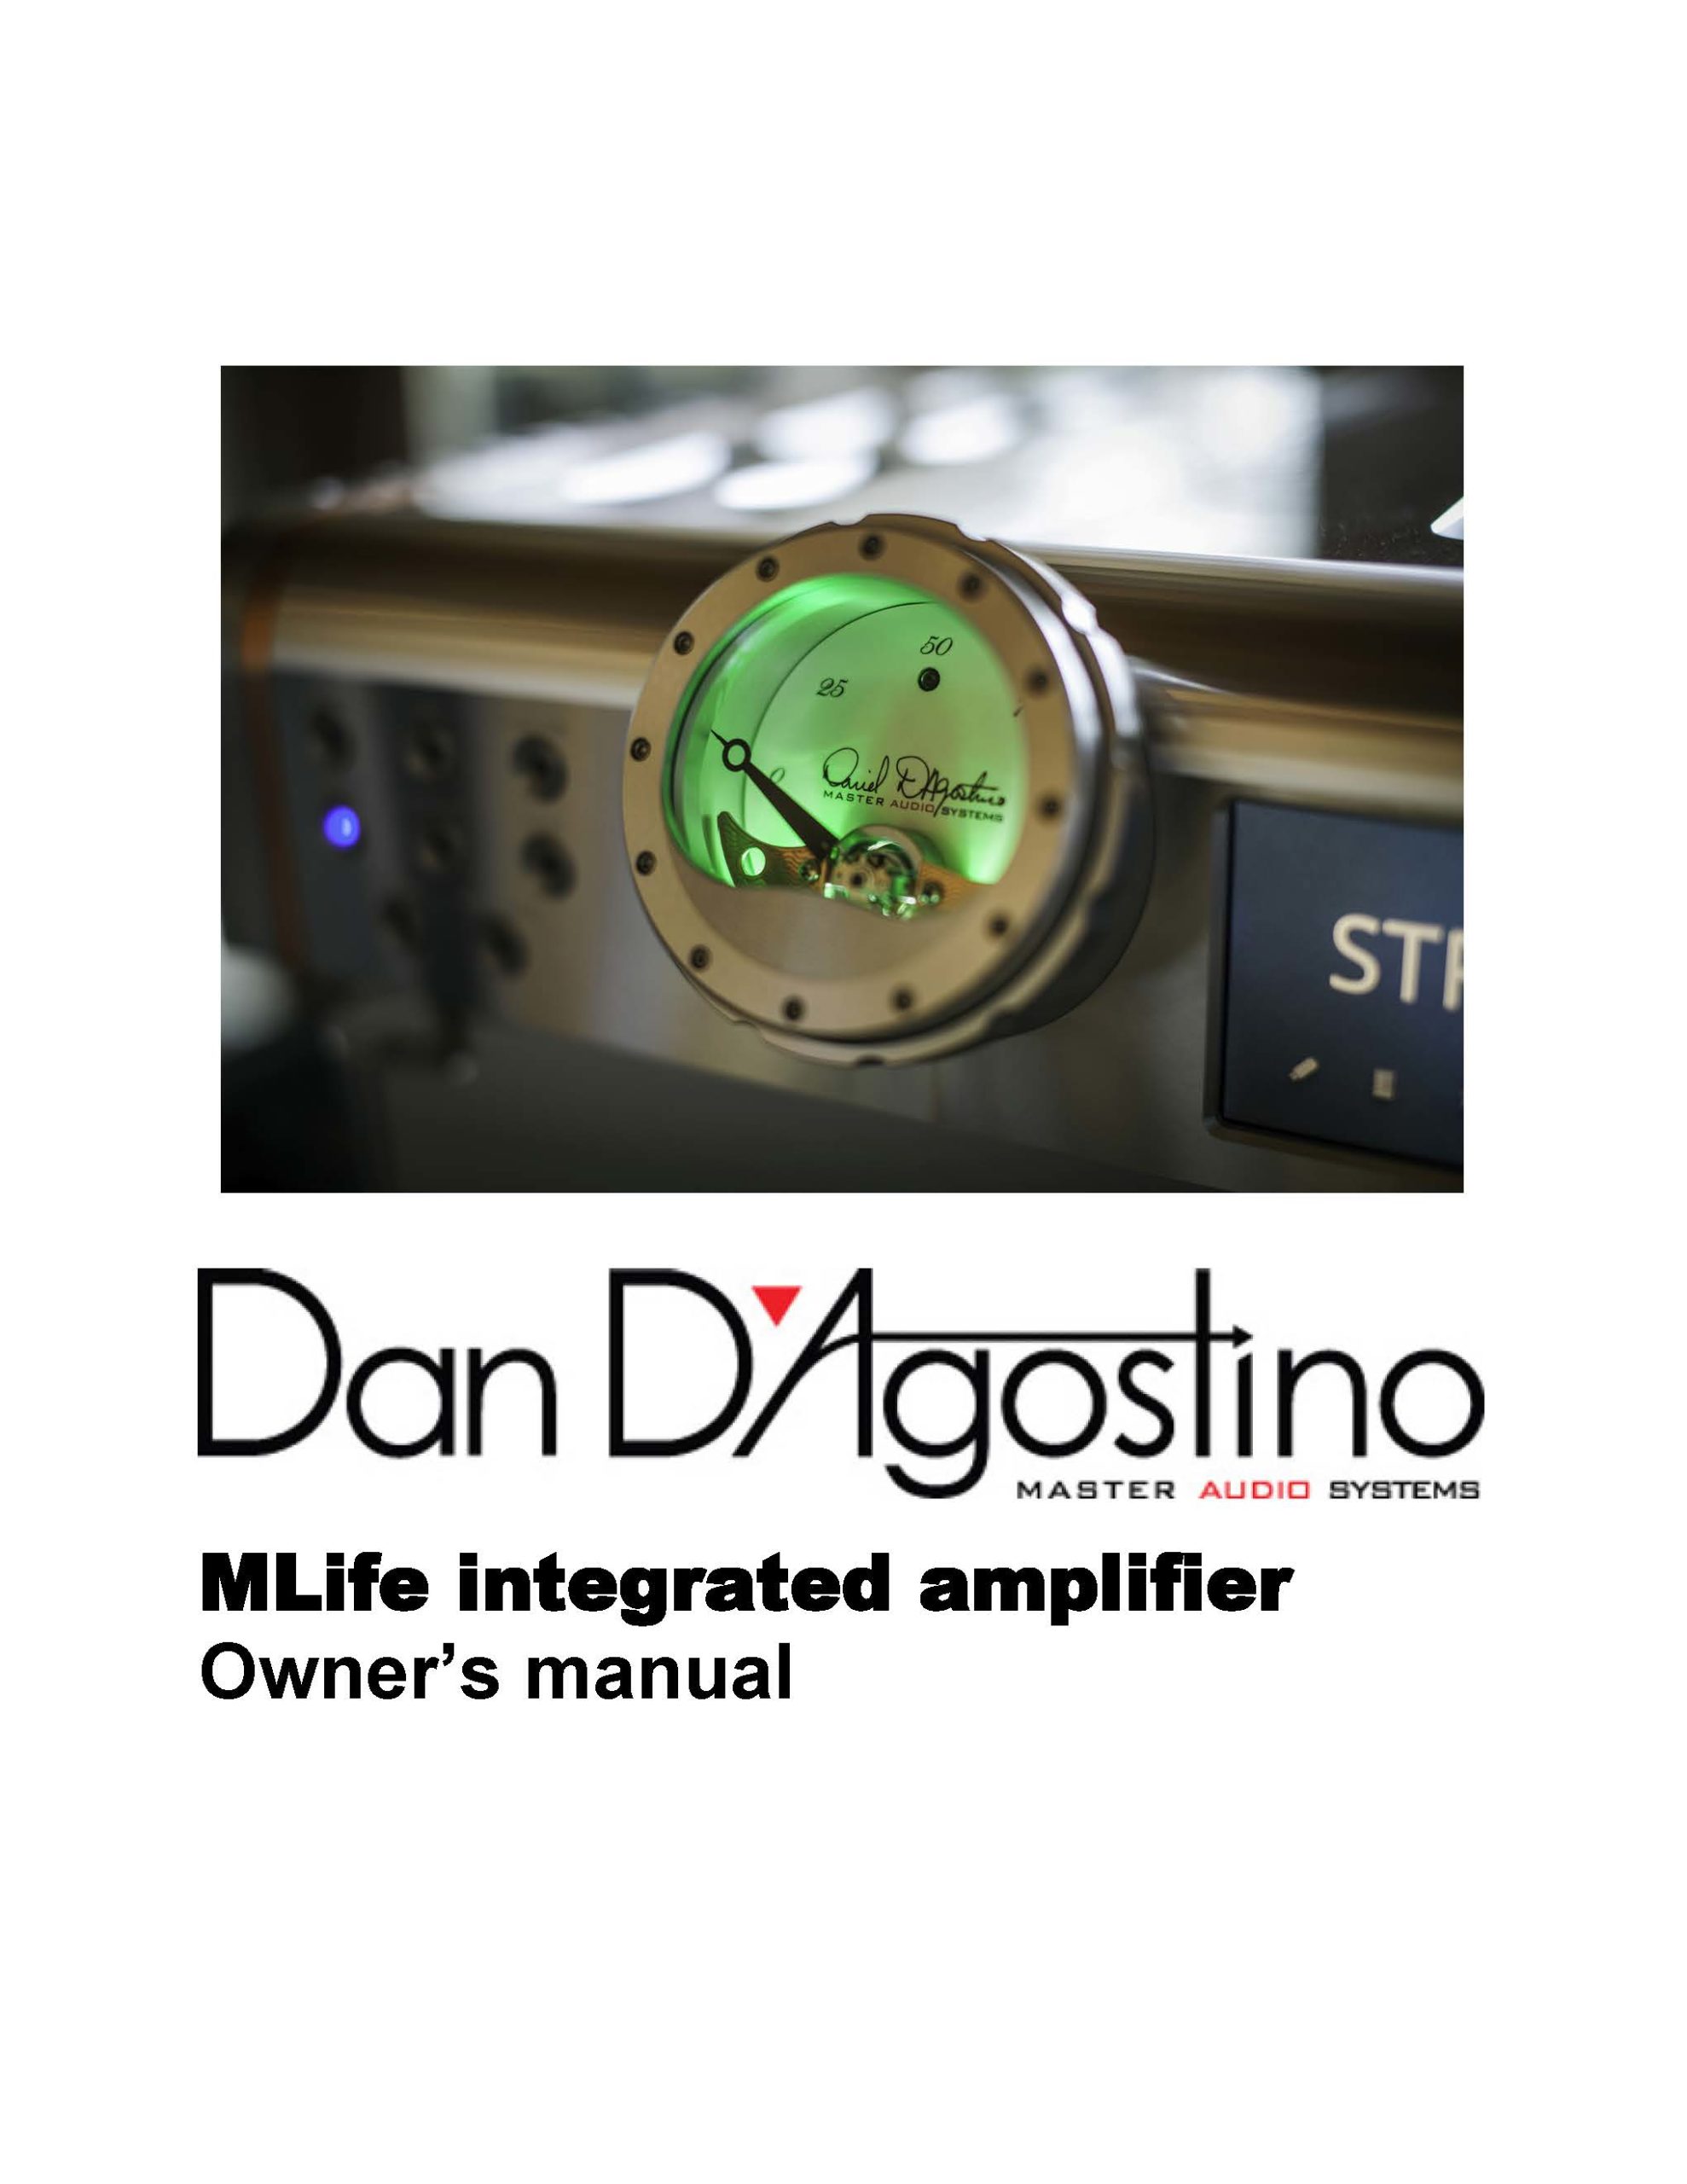 Dan D'Agostino Momentum Lifestyle Integrated Amplifier Owner Manual - Norman Audio